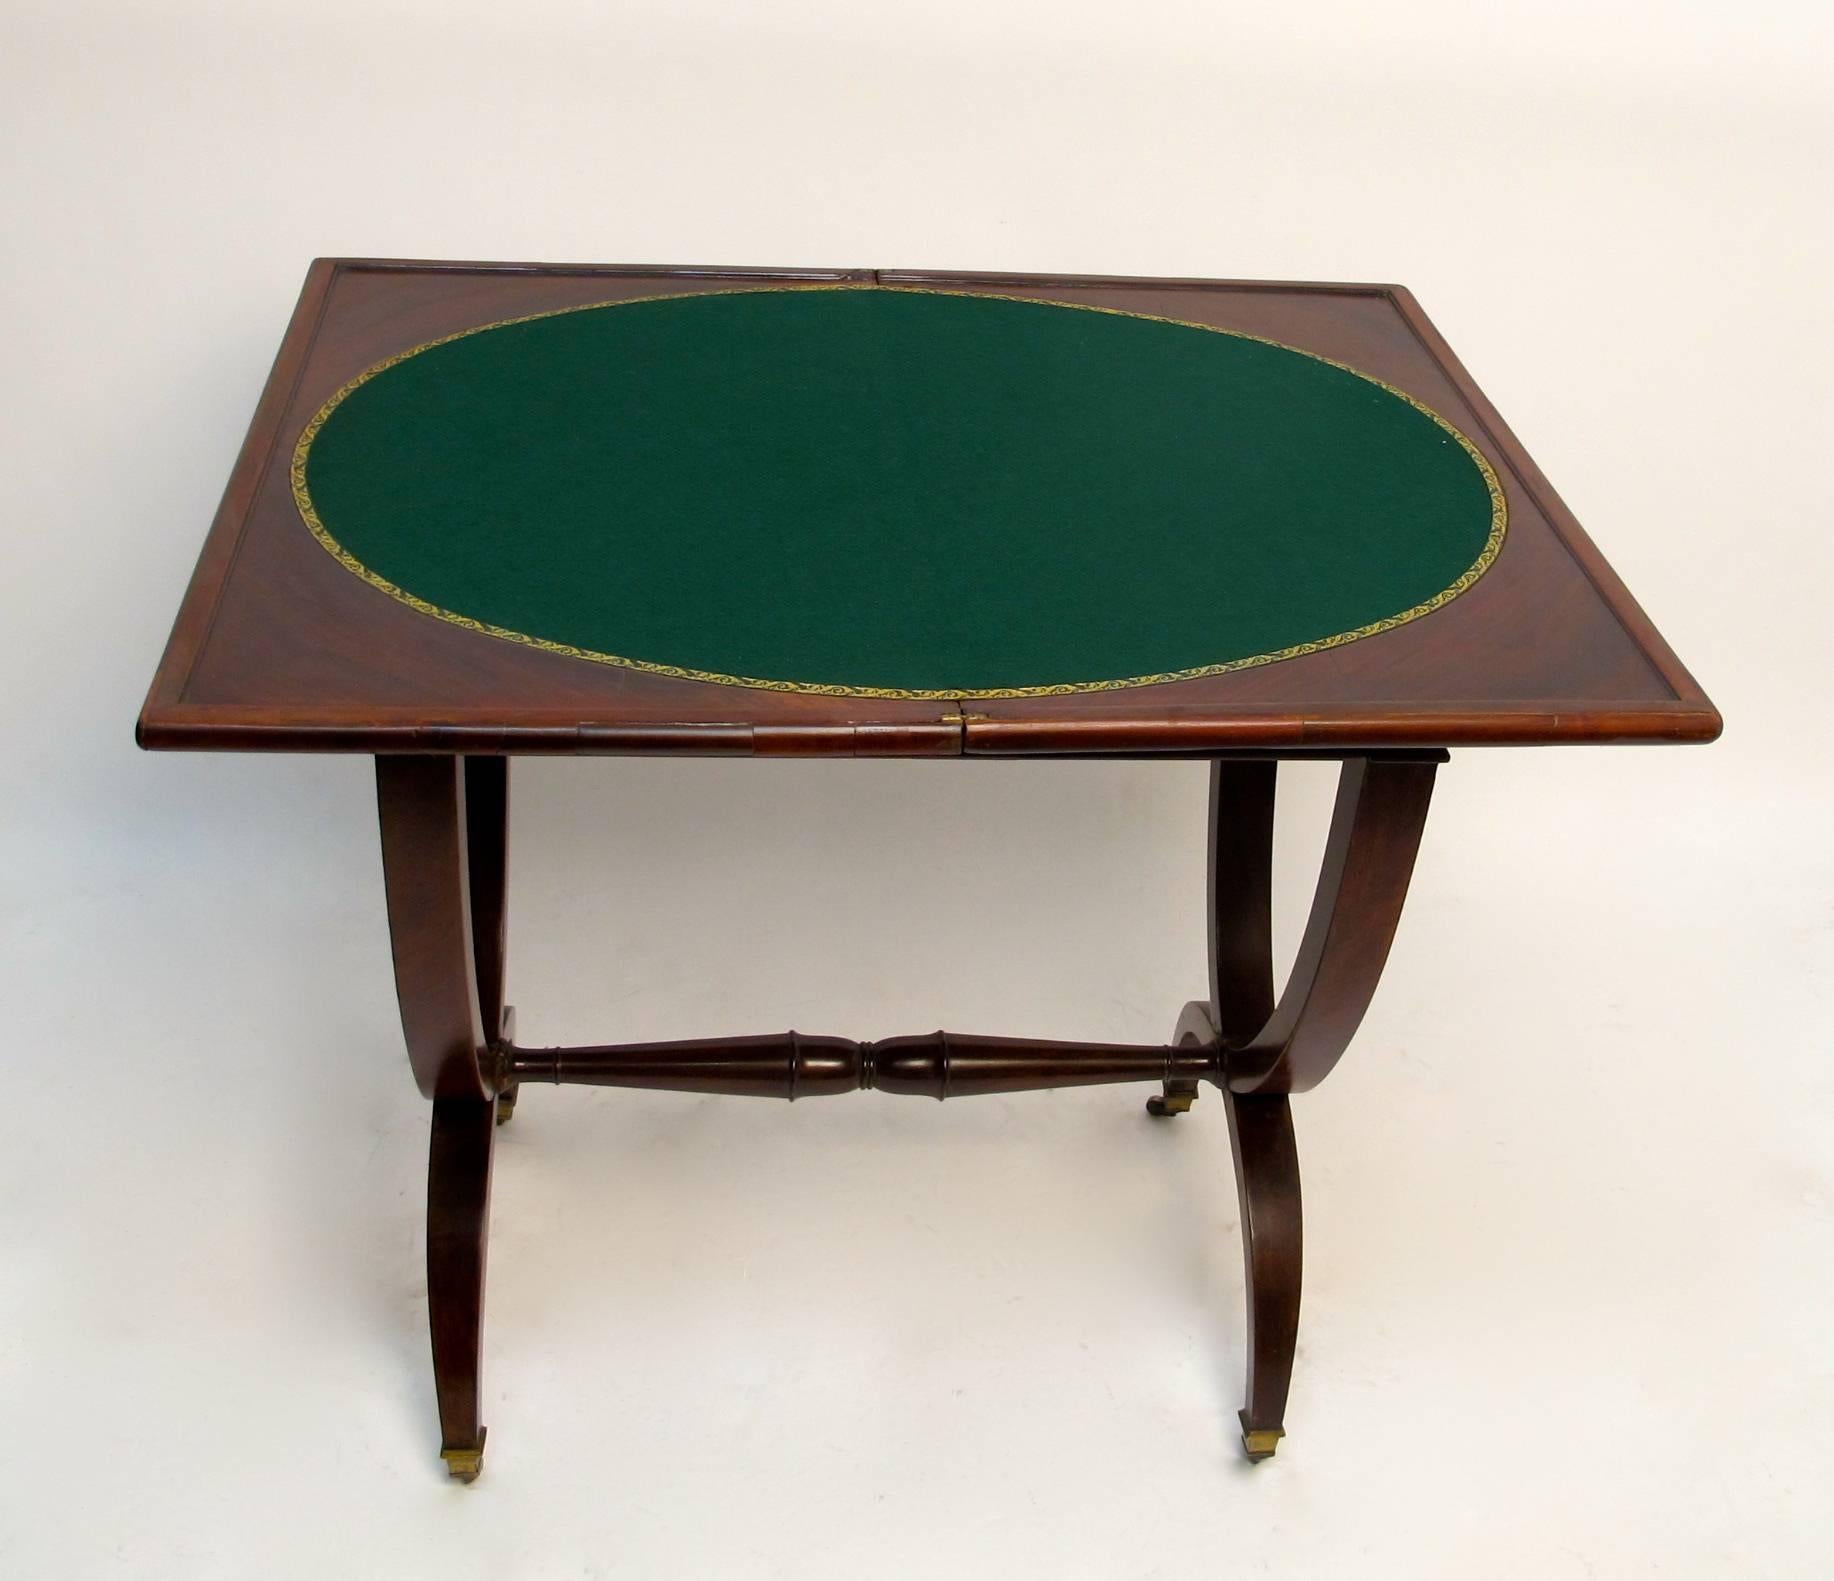 This elegant felt surfaced game/ side table measures 28.5 inches high, 25 inches wide and 16 inches deep when folded.